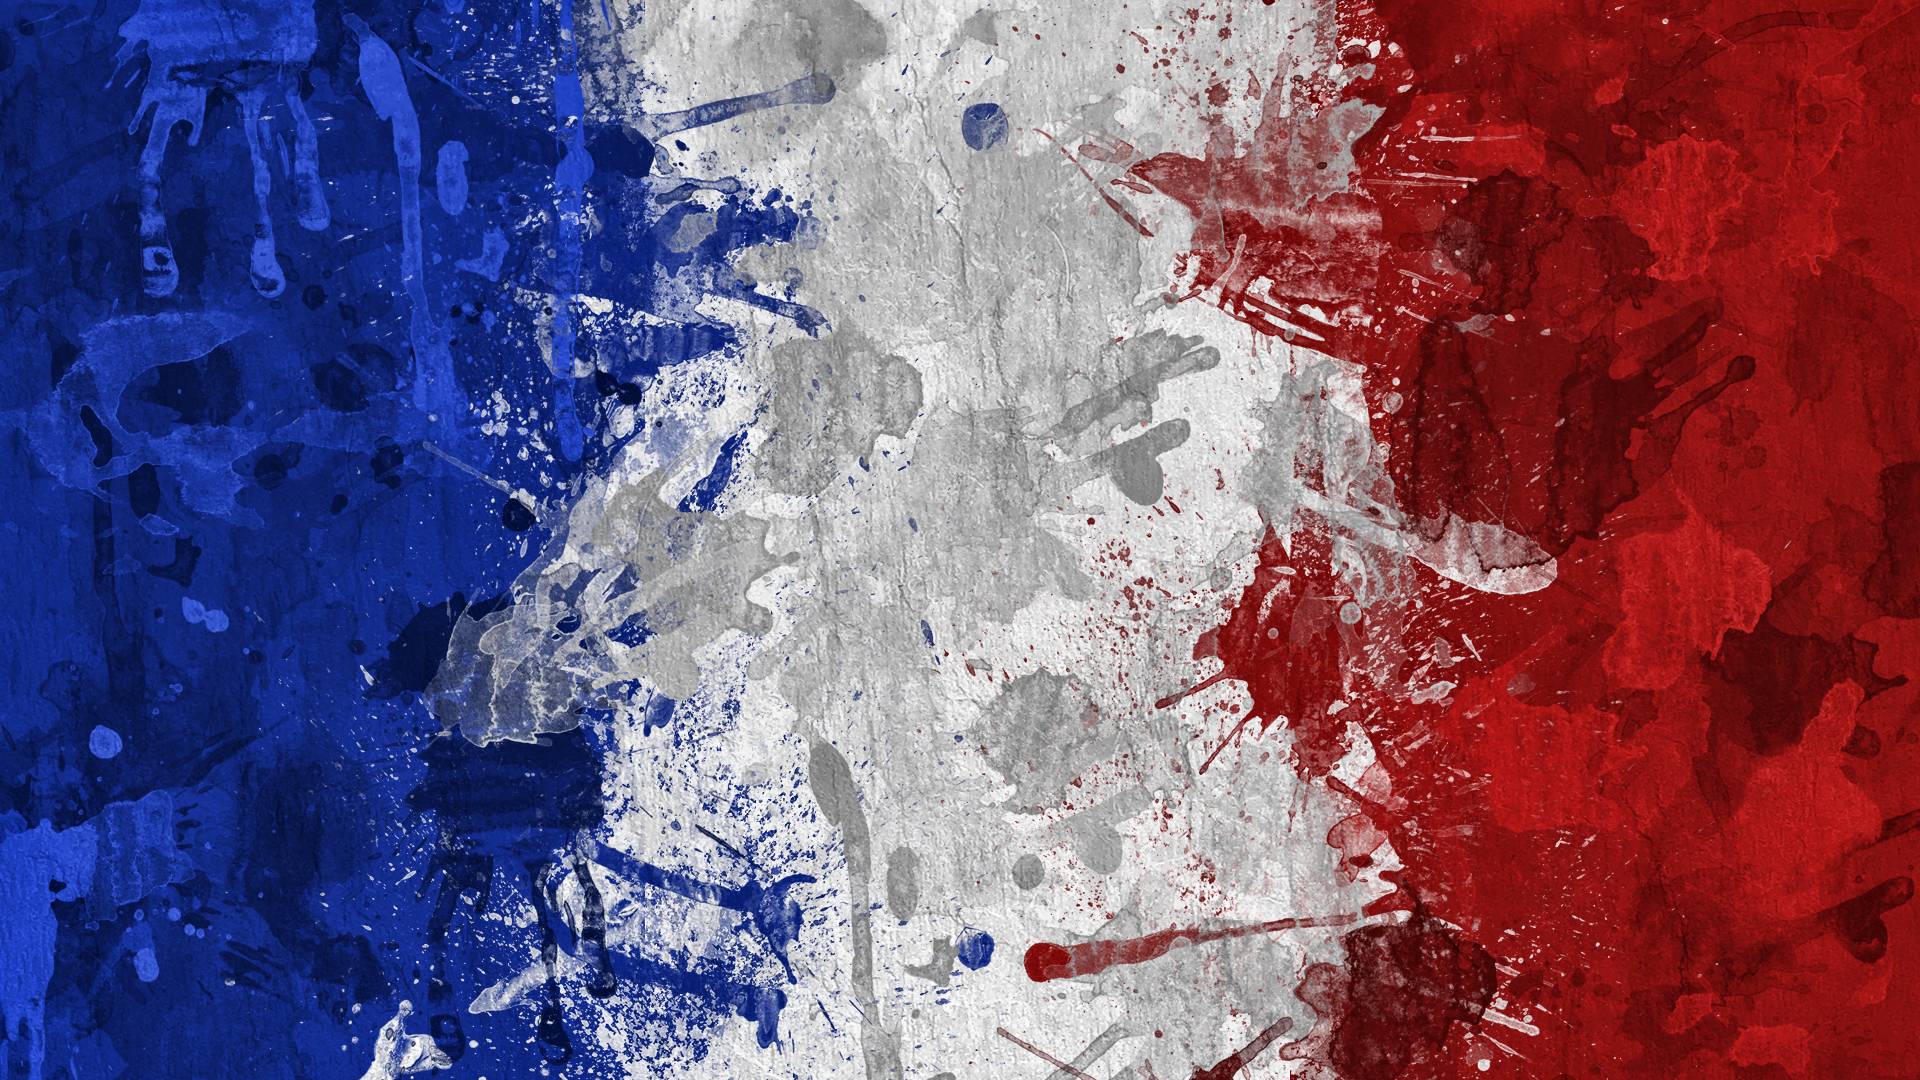 French Flag Wallpaper 1920x1080 Download